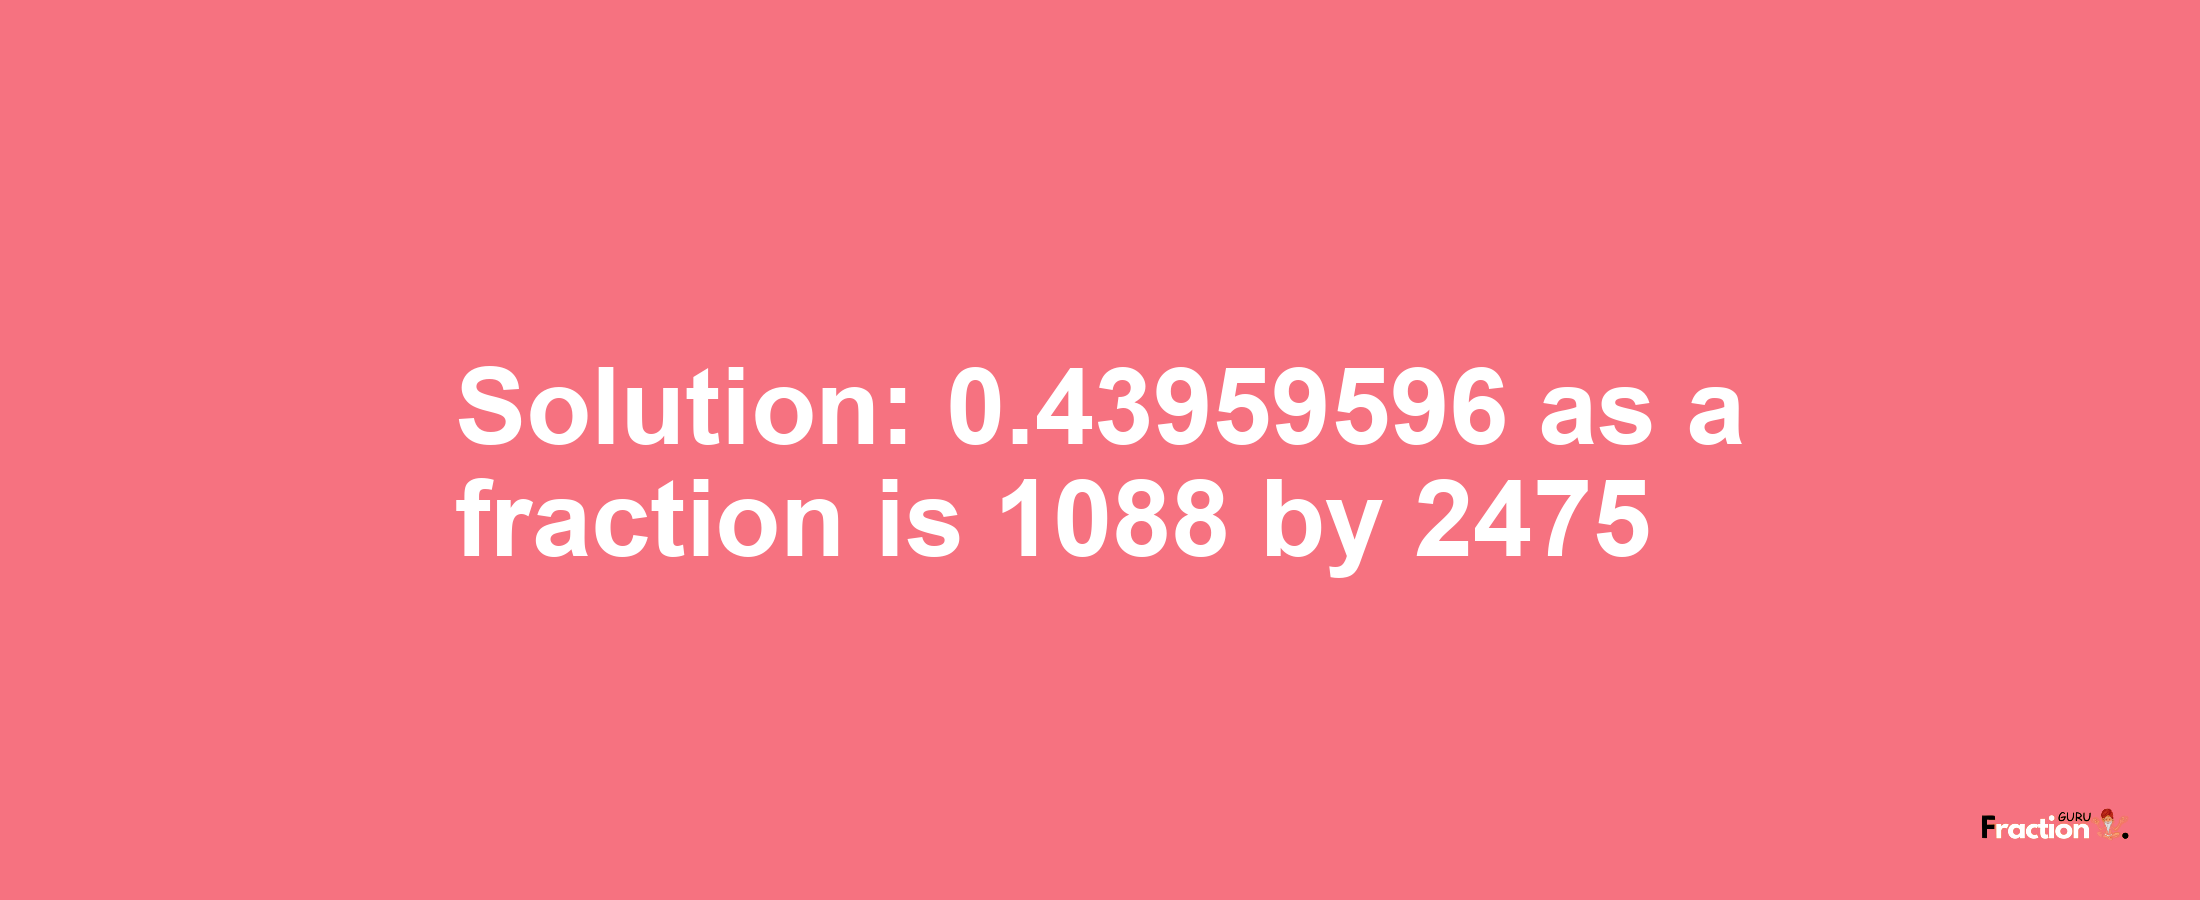 Solution:0.43959596 as a fraction is 1088/2475